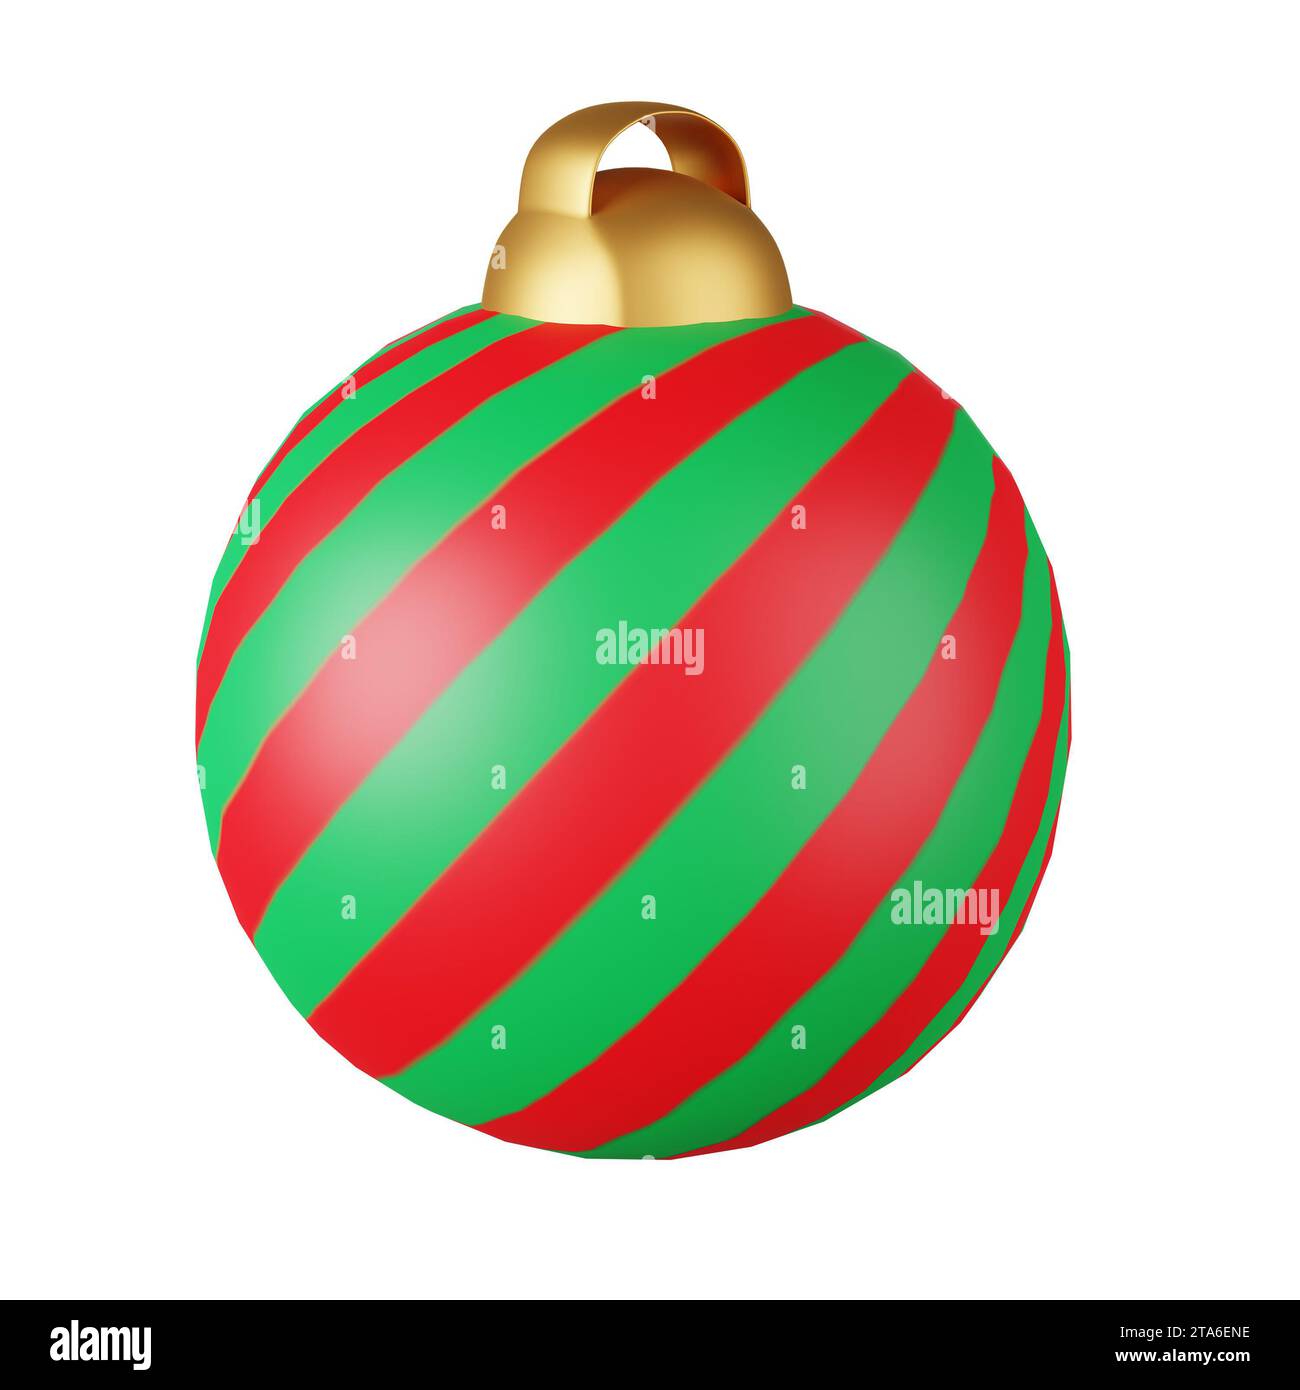 Enhance your holiday designs with these captivating striped Christmas ball images. Stock Photo